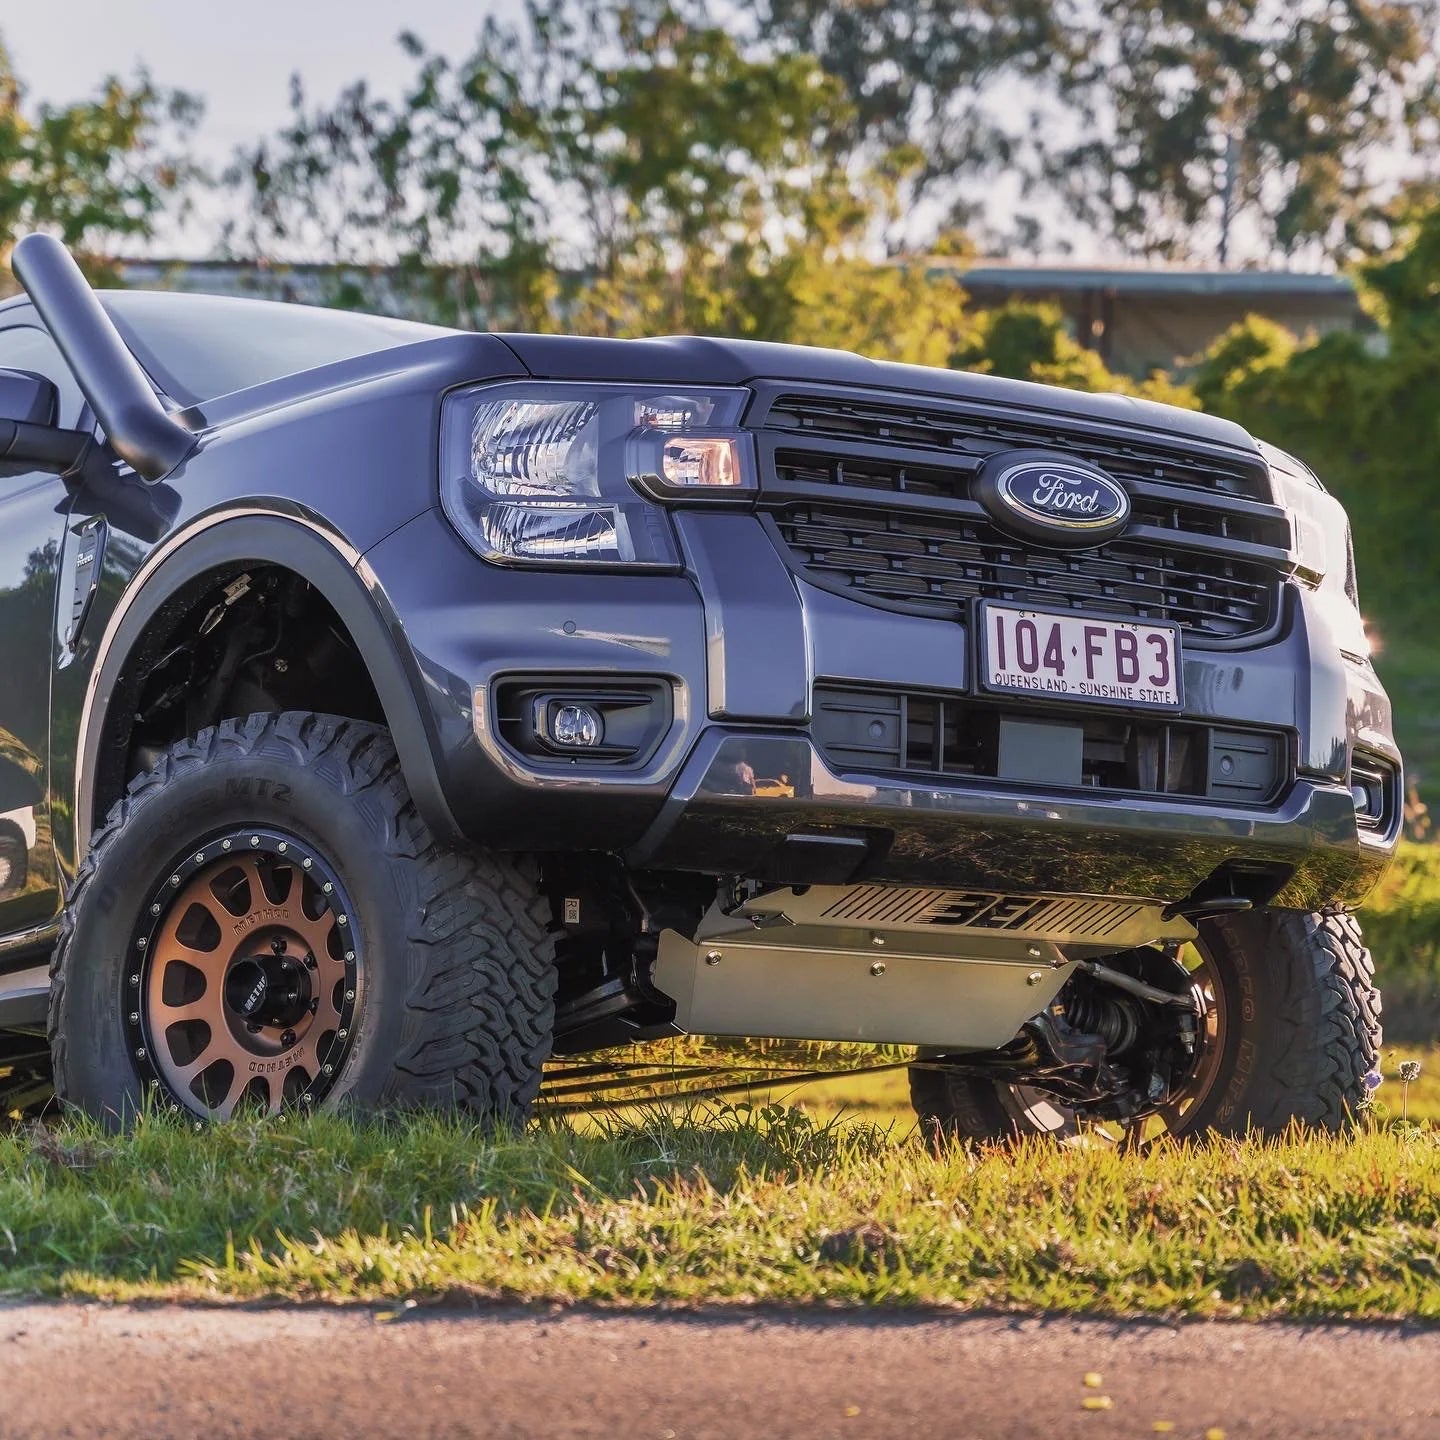 BEIHOUSE FORD EVEREST NEXT GEN UNDERBODY PROTECTION